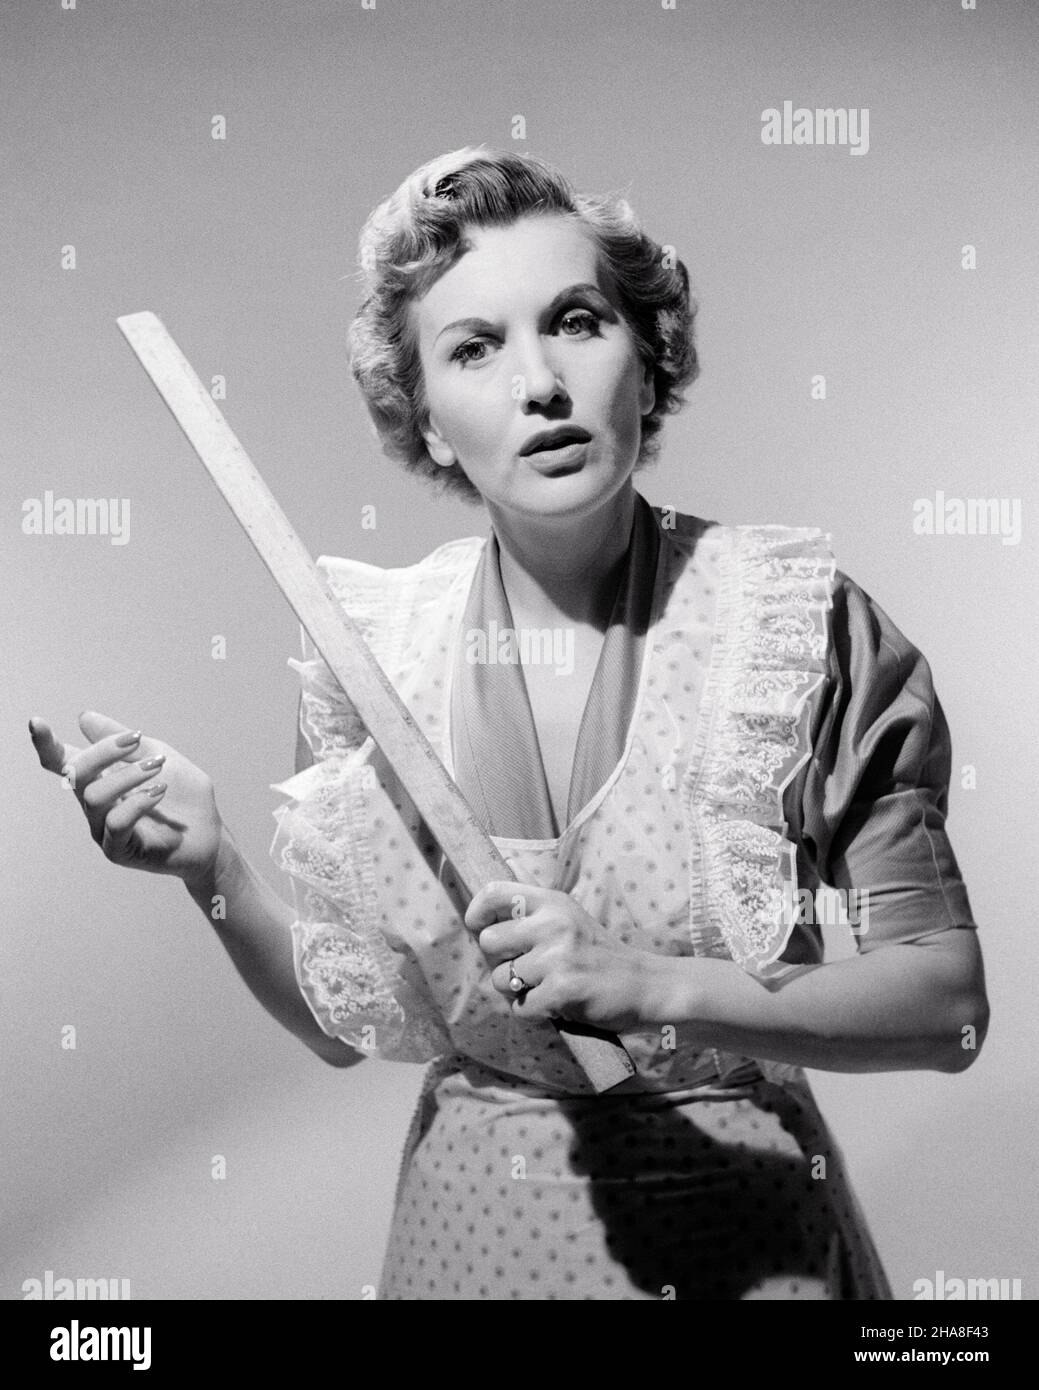 1950s 1960s SERIOUS HOUSEWIFE MOTHER WEARING APRON LOOKING AT CAMERA HOLDING YARD STICK STRESSING A POINT OF ORDER OR DISCIPLINE - s4338 CLE003 HARS HALF-LENGTH LADIES PERSONS DISCIPLINE TROUBLED B&W CONCERNED SADNESS EYE CONTACT HOMEMAKER HOMEMAKERS STRATEGY RULER POWERFUL A AUTHORITY HOUSEWIVES MOOD CONCEPTUAL GLUM OR MID-ADULT MID-ADULT WOMAN MISERABLE SOLUTIONS STRESSING YARD STICK BLACK AND WHITE CAUCASIAN ETHNICITY OLD FASHIONED Stock Photo